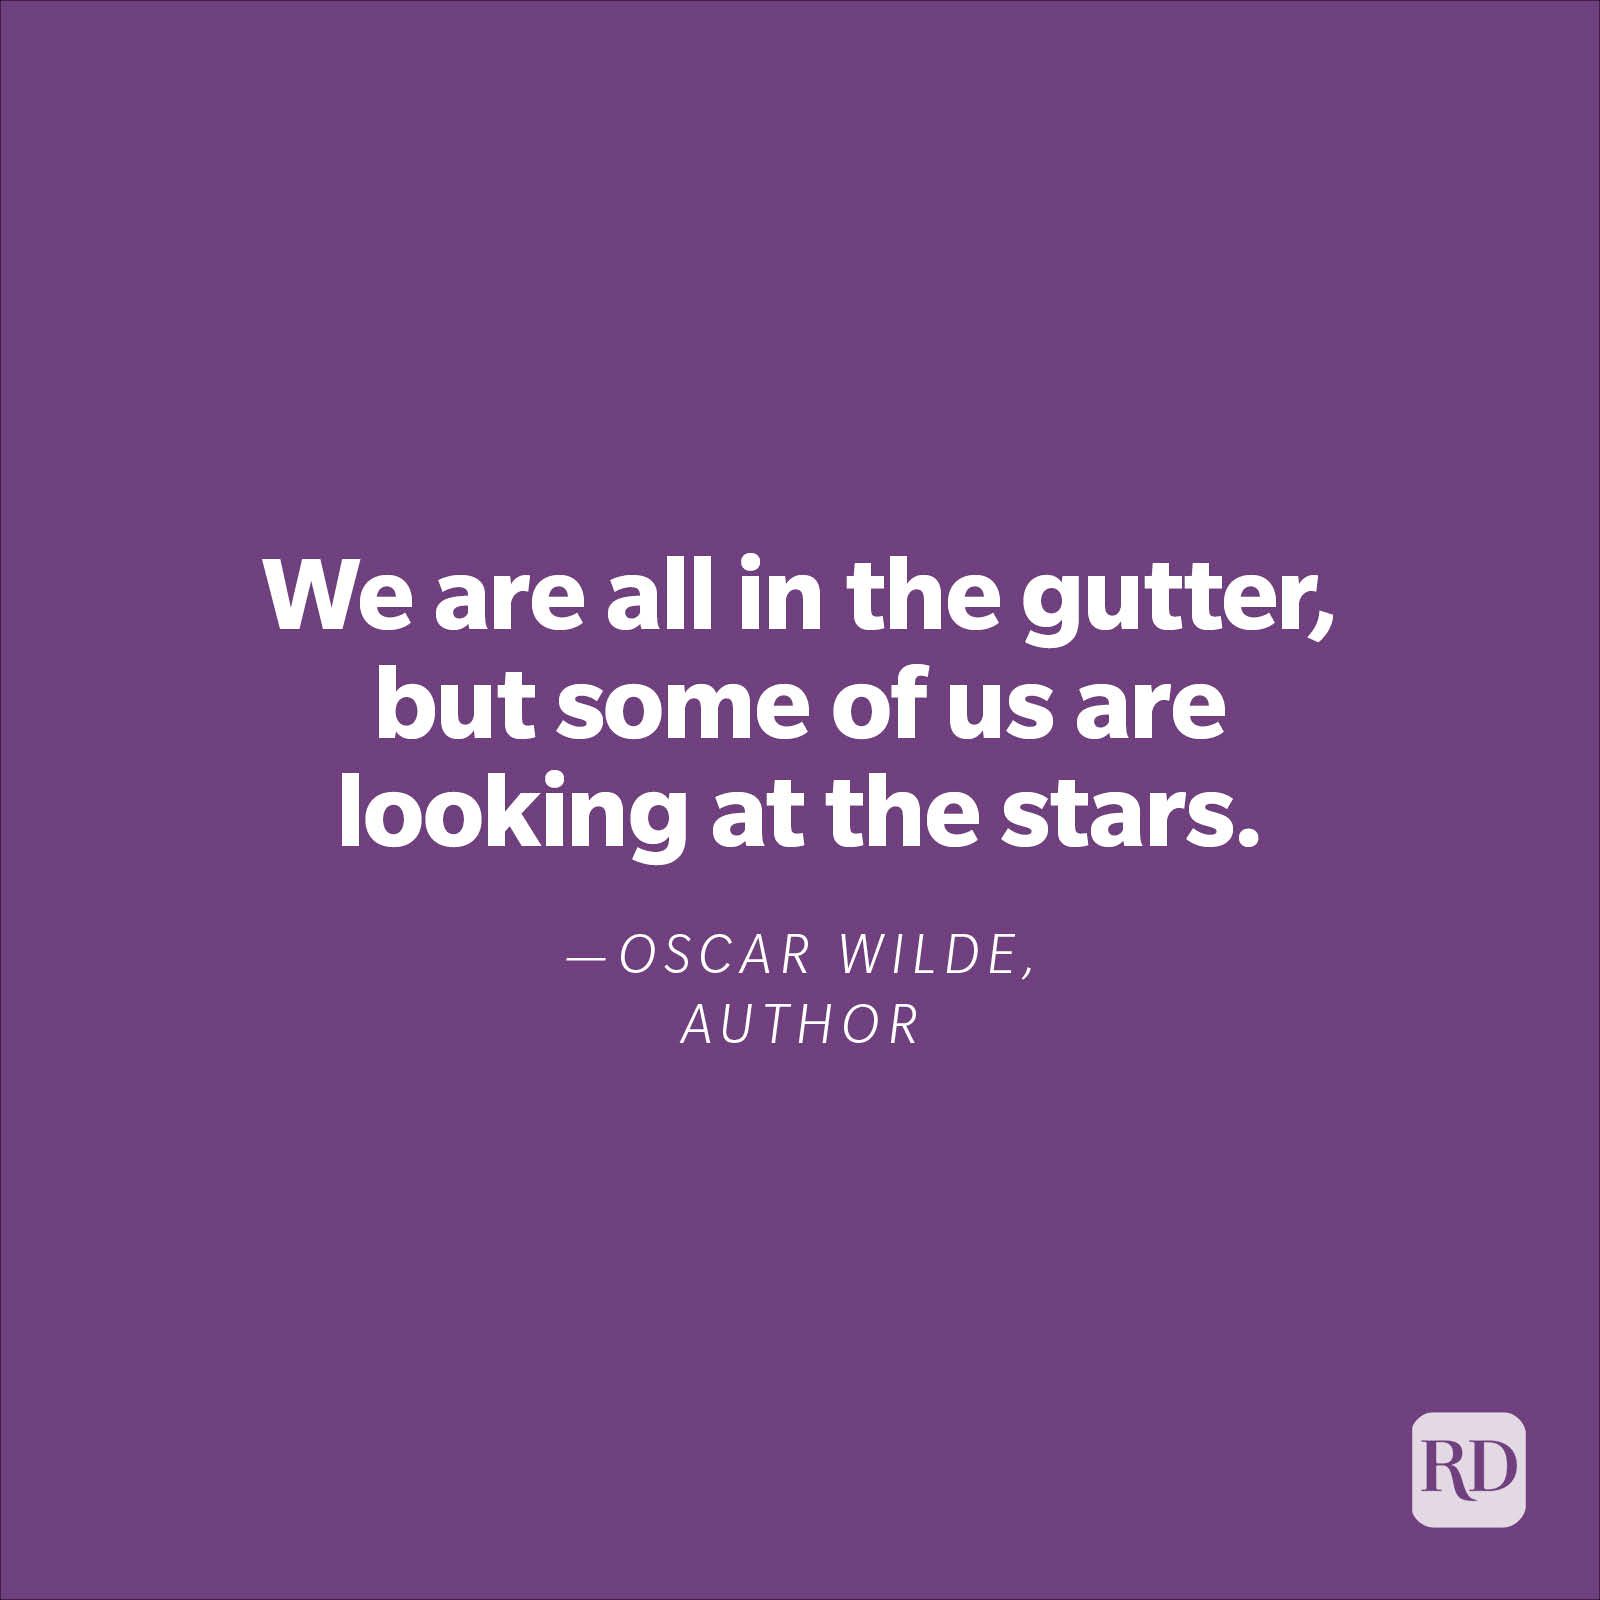 "We are all in the gutter, but some of us are looking at the stars."—Oscar Wilde, author